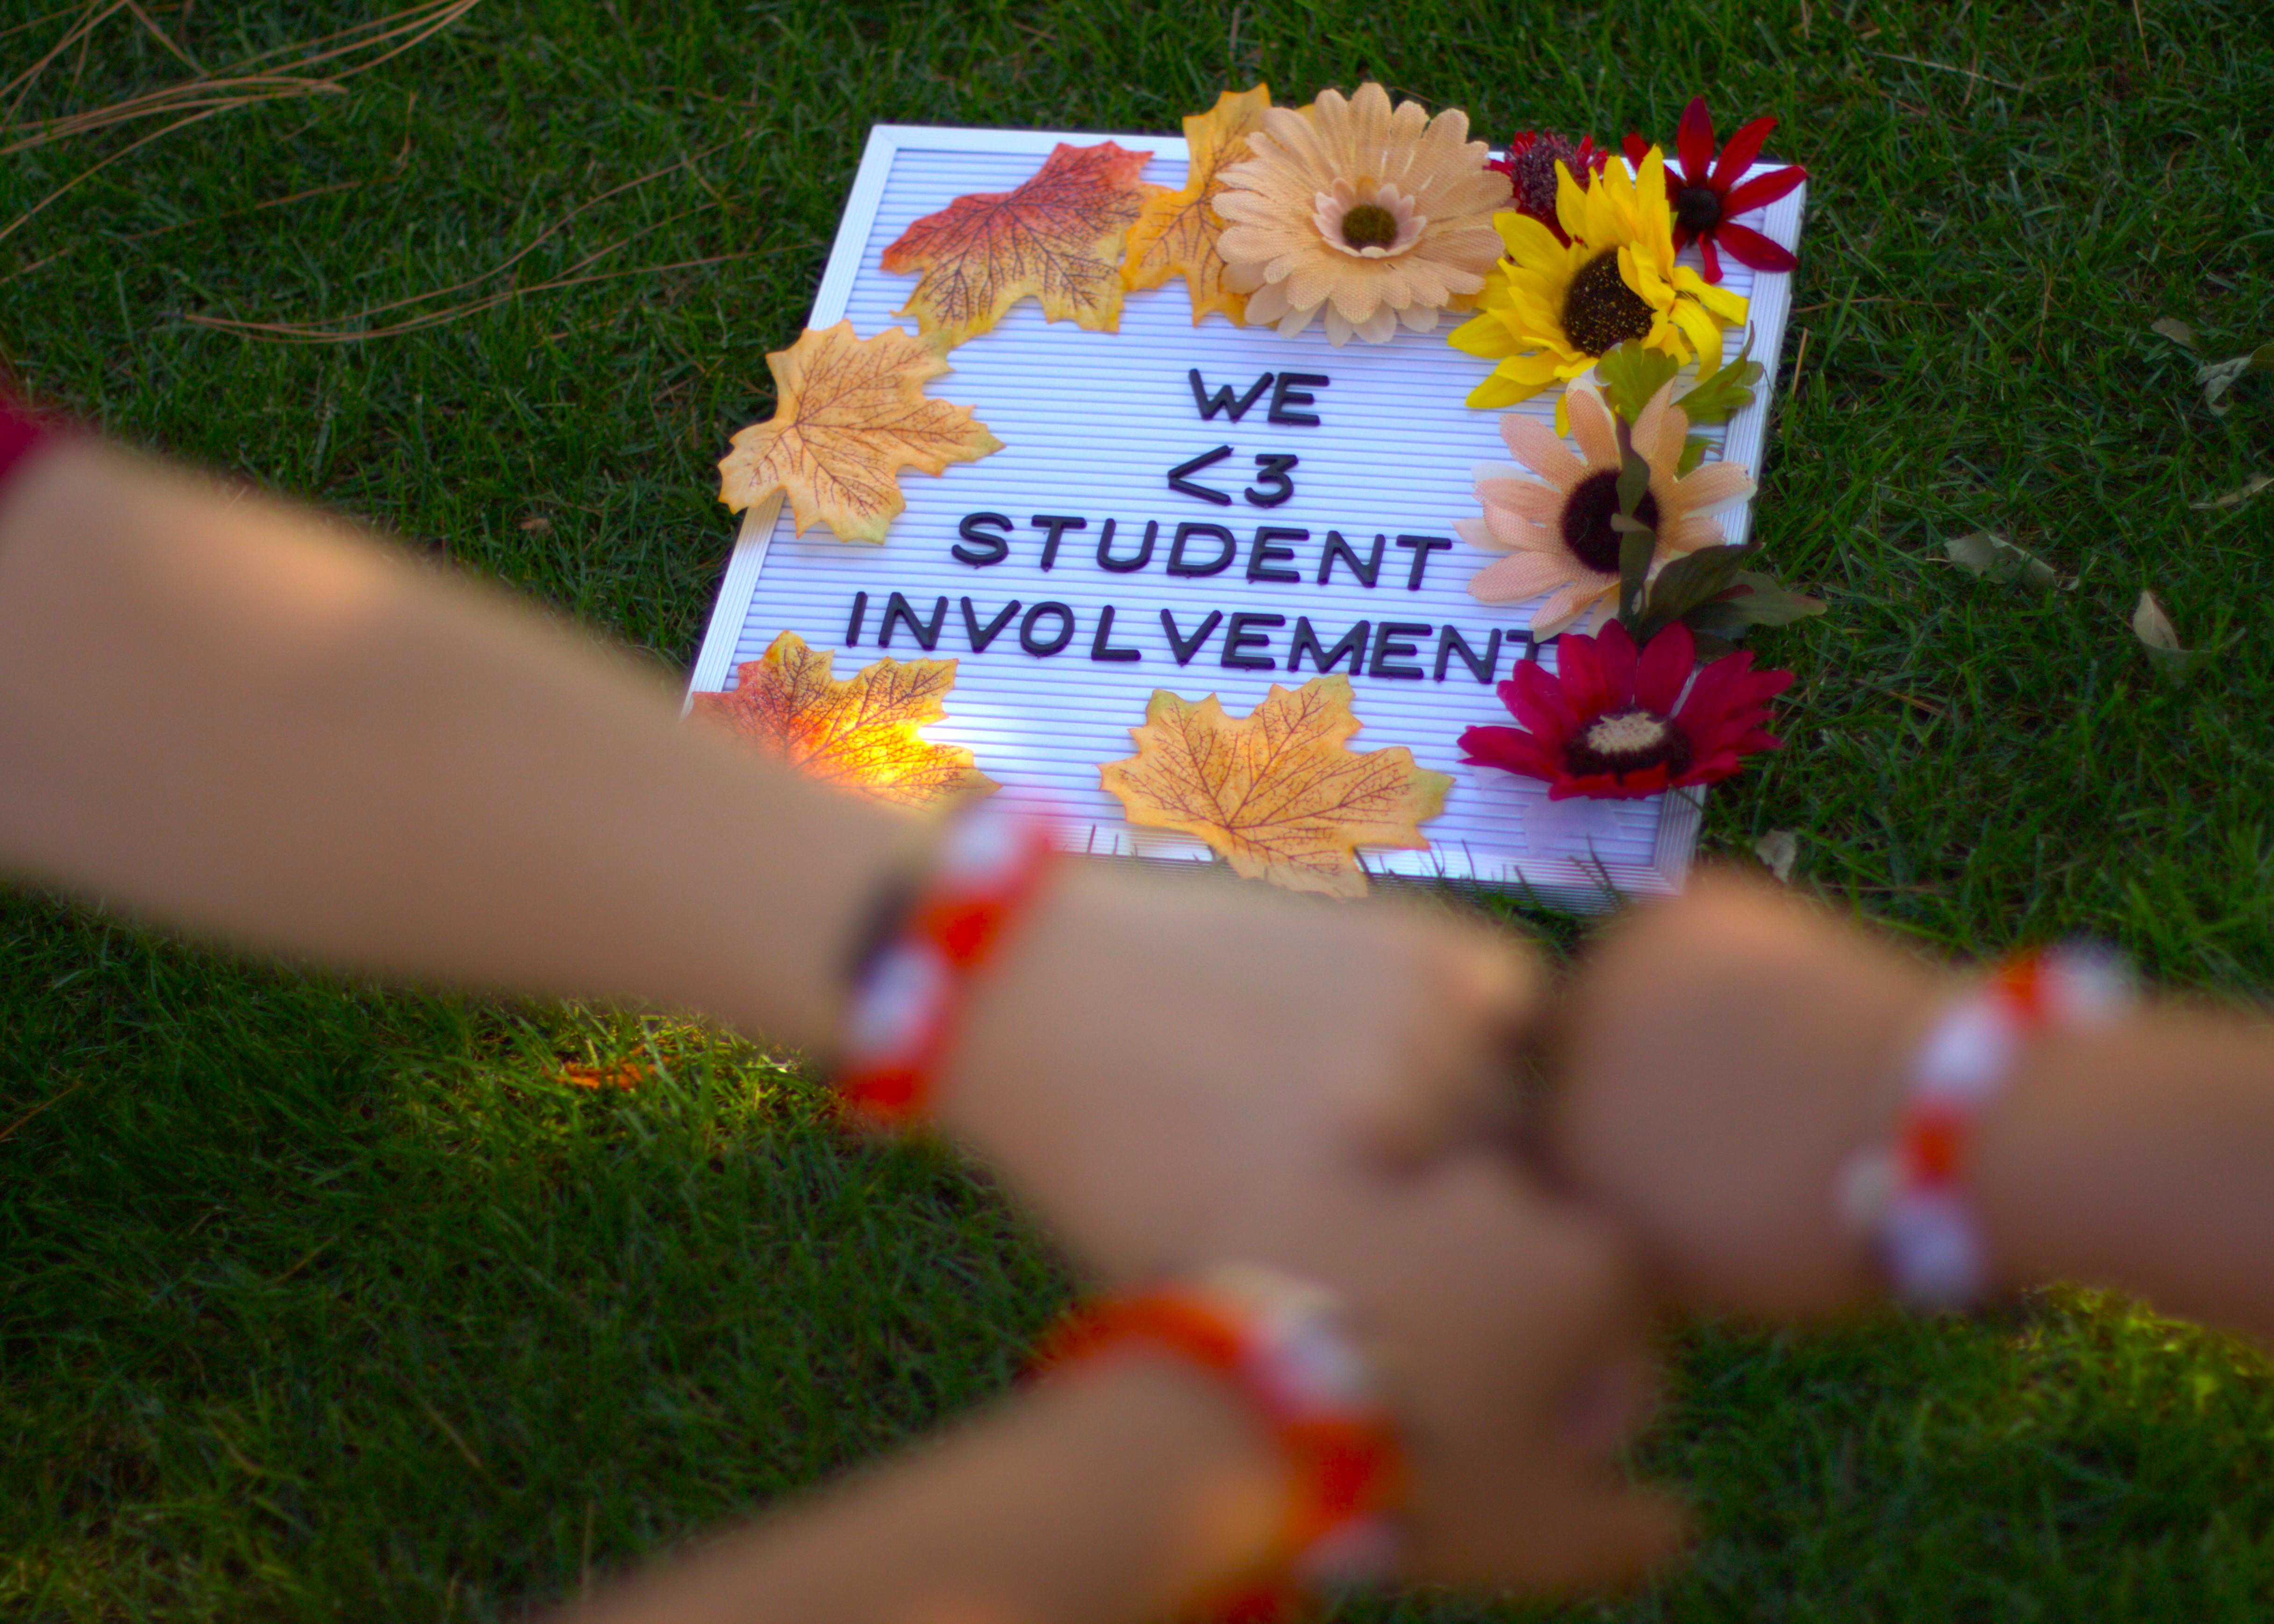 Three out-of-focus hands fist-bump in front of a board that says: "We <3 Student Involvement"